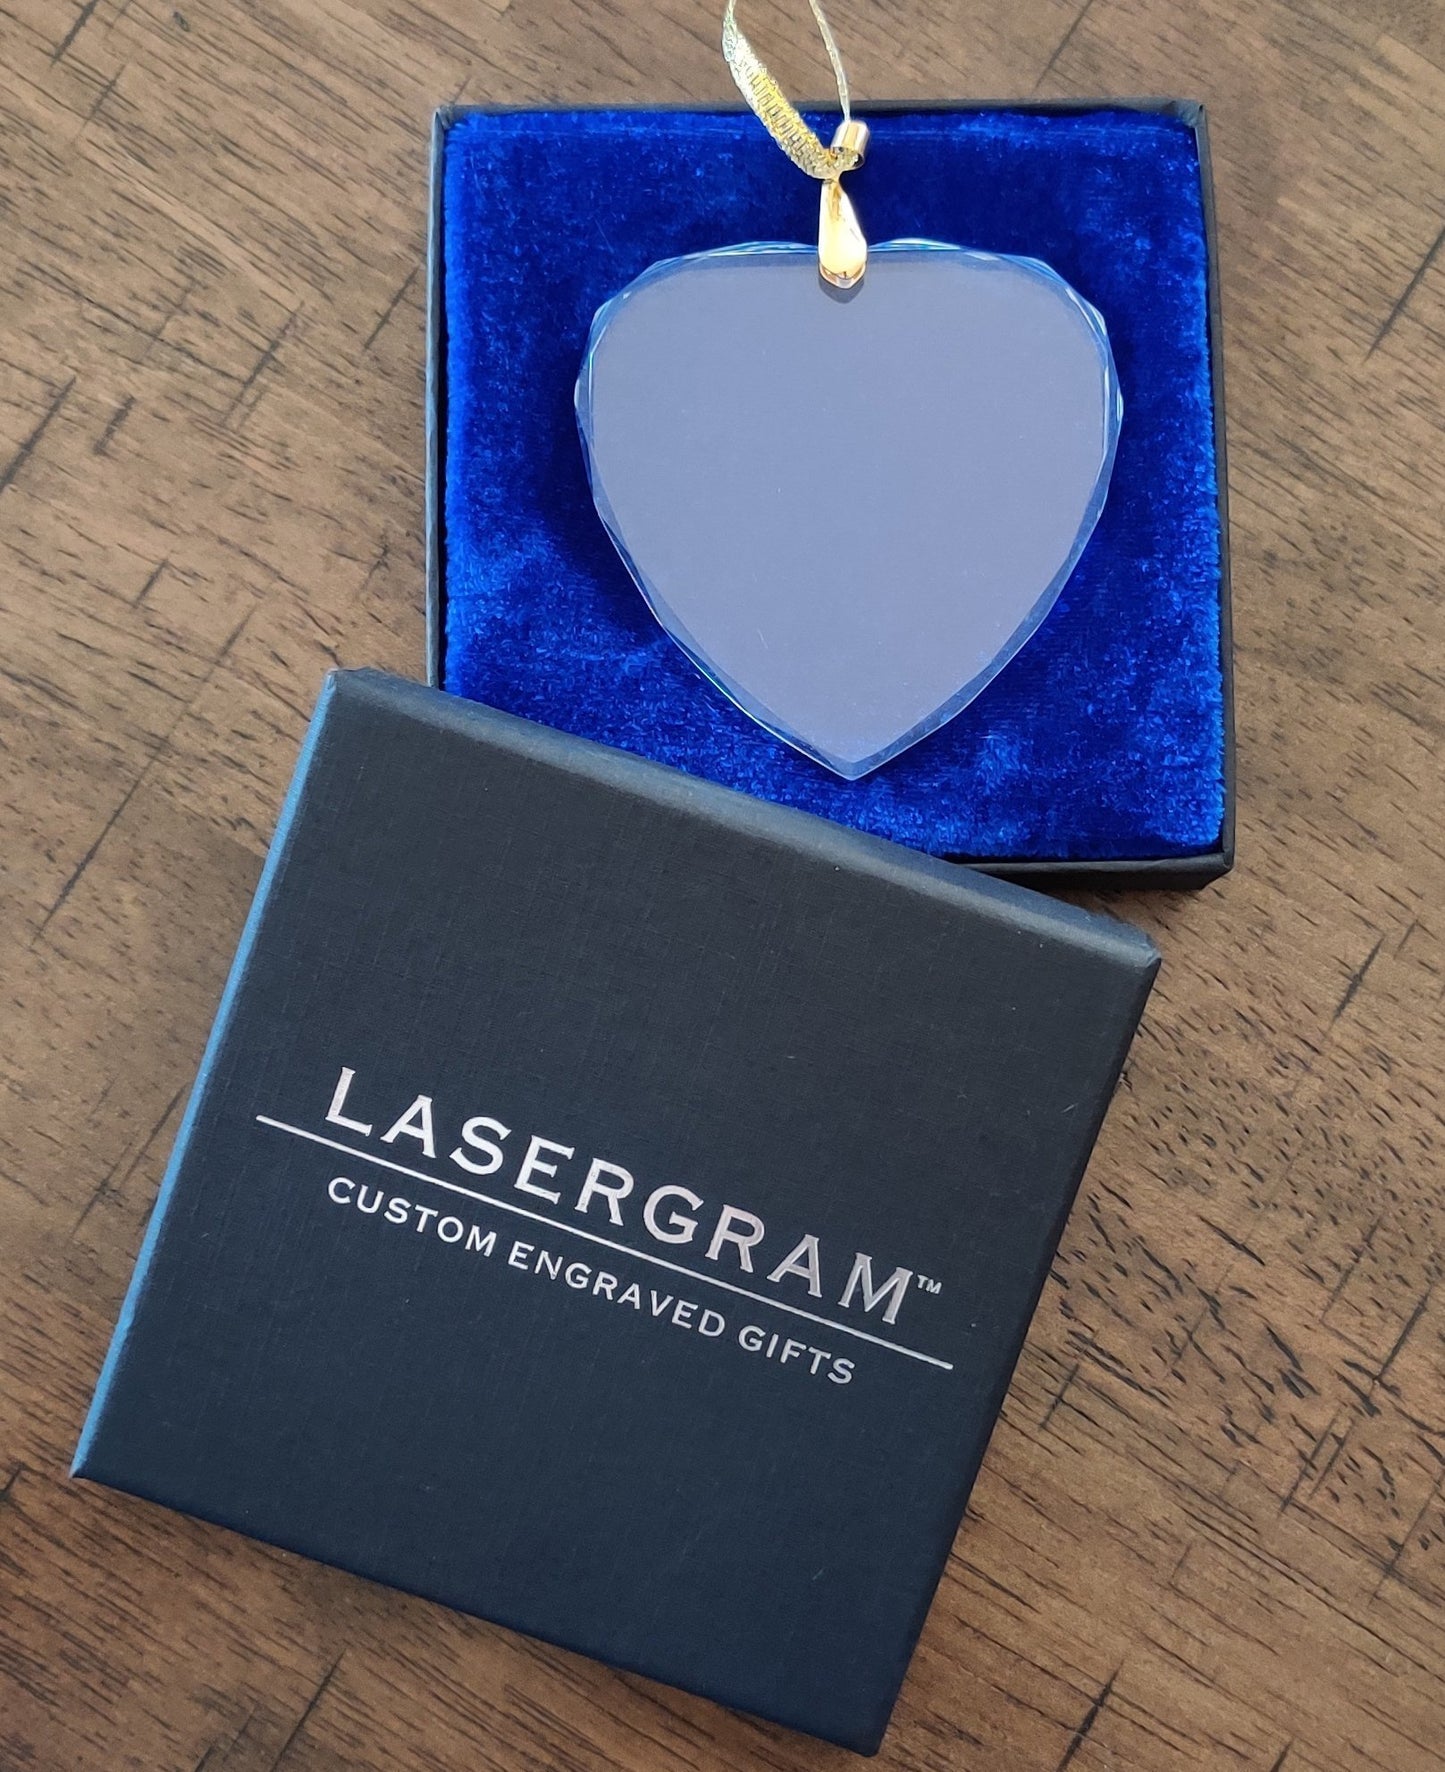 LaserGram Christmas Ornament, Hawk, Personalized Engraving Included (Heart Shape)